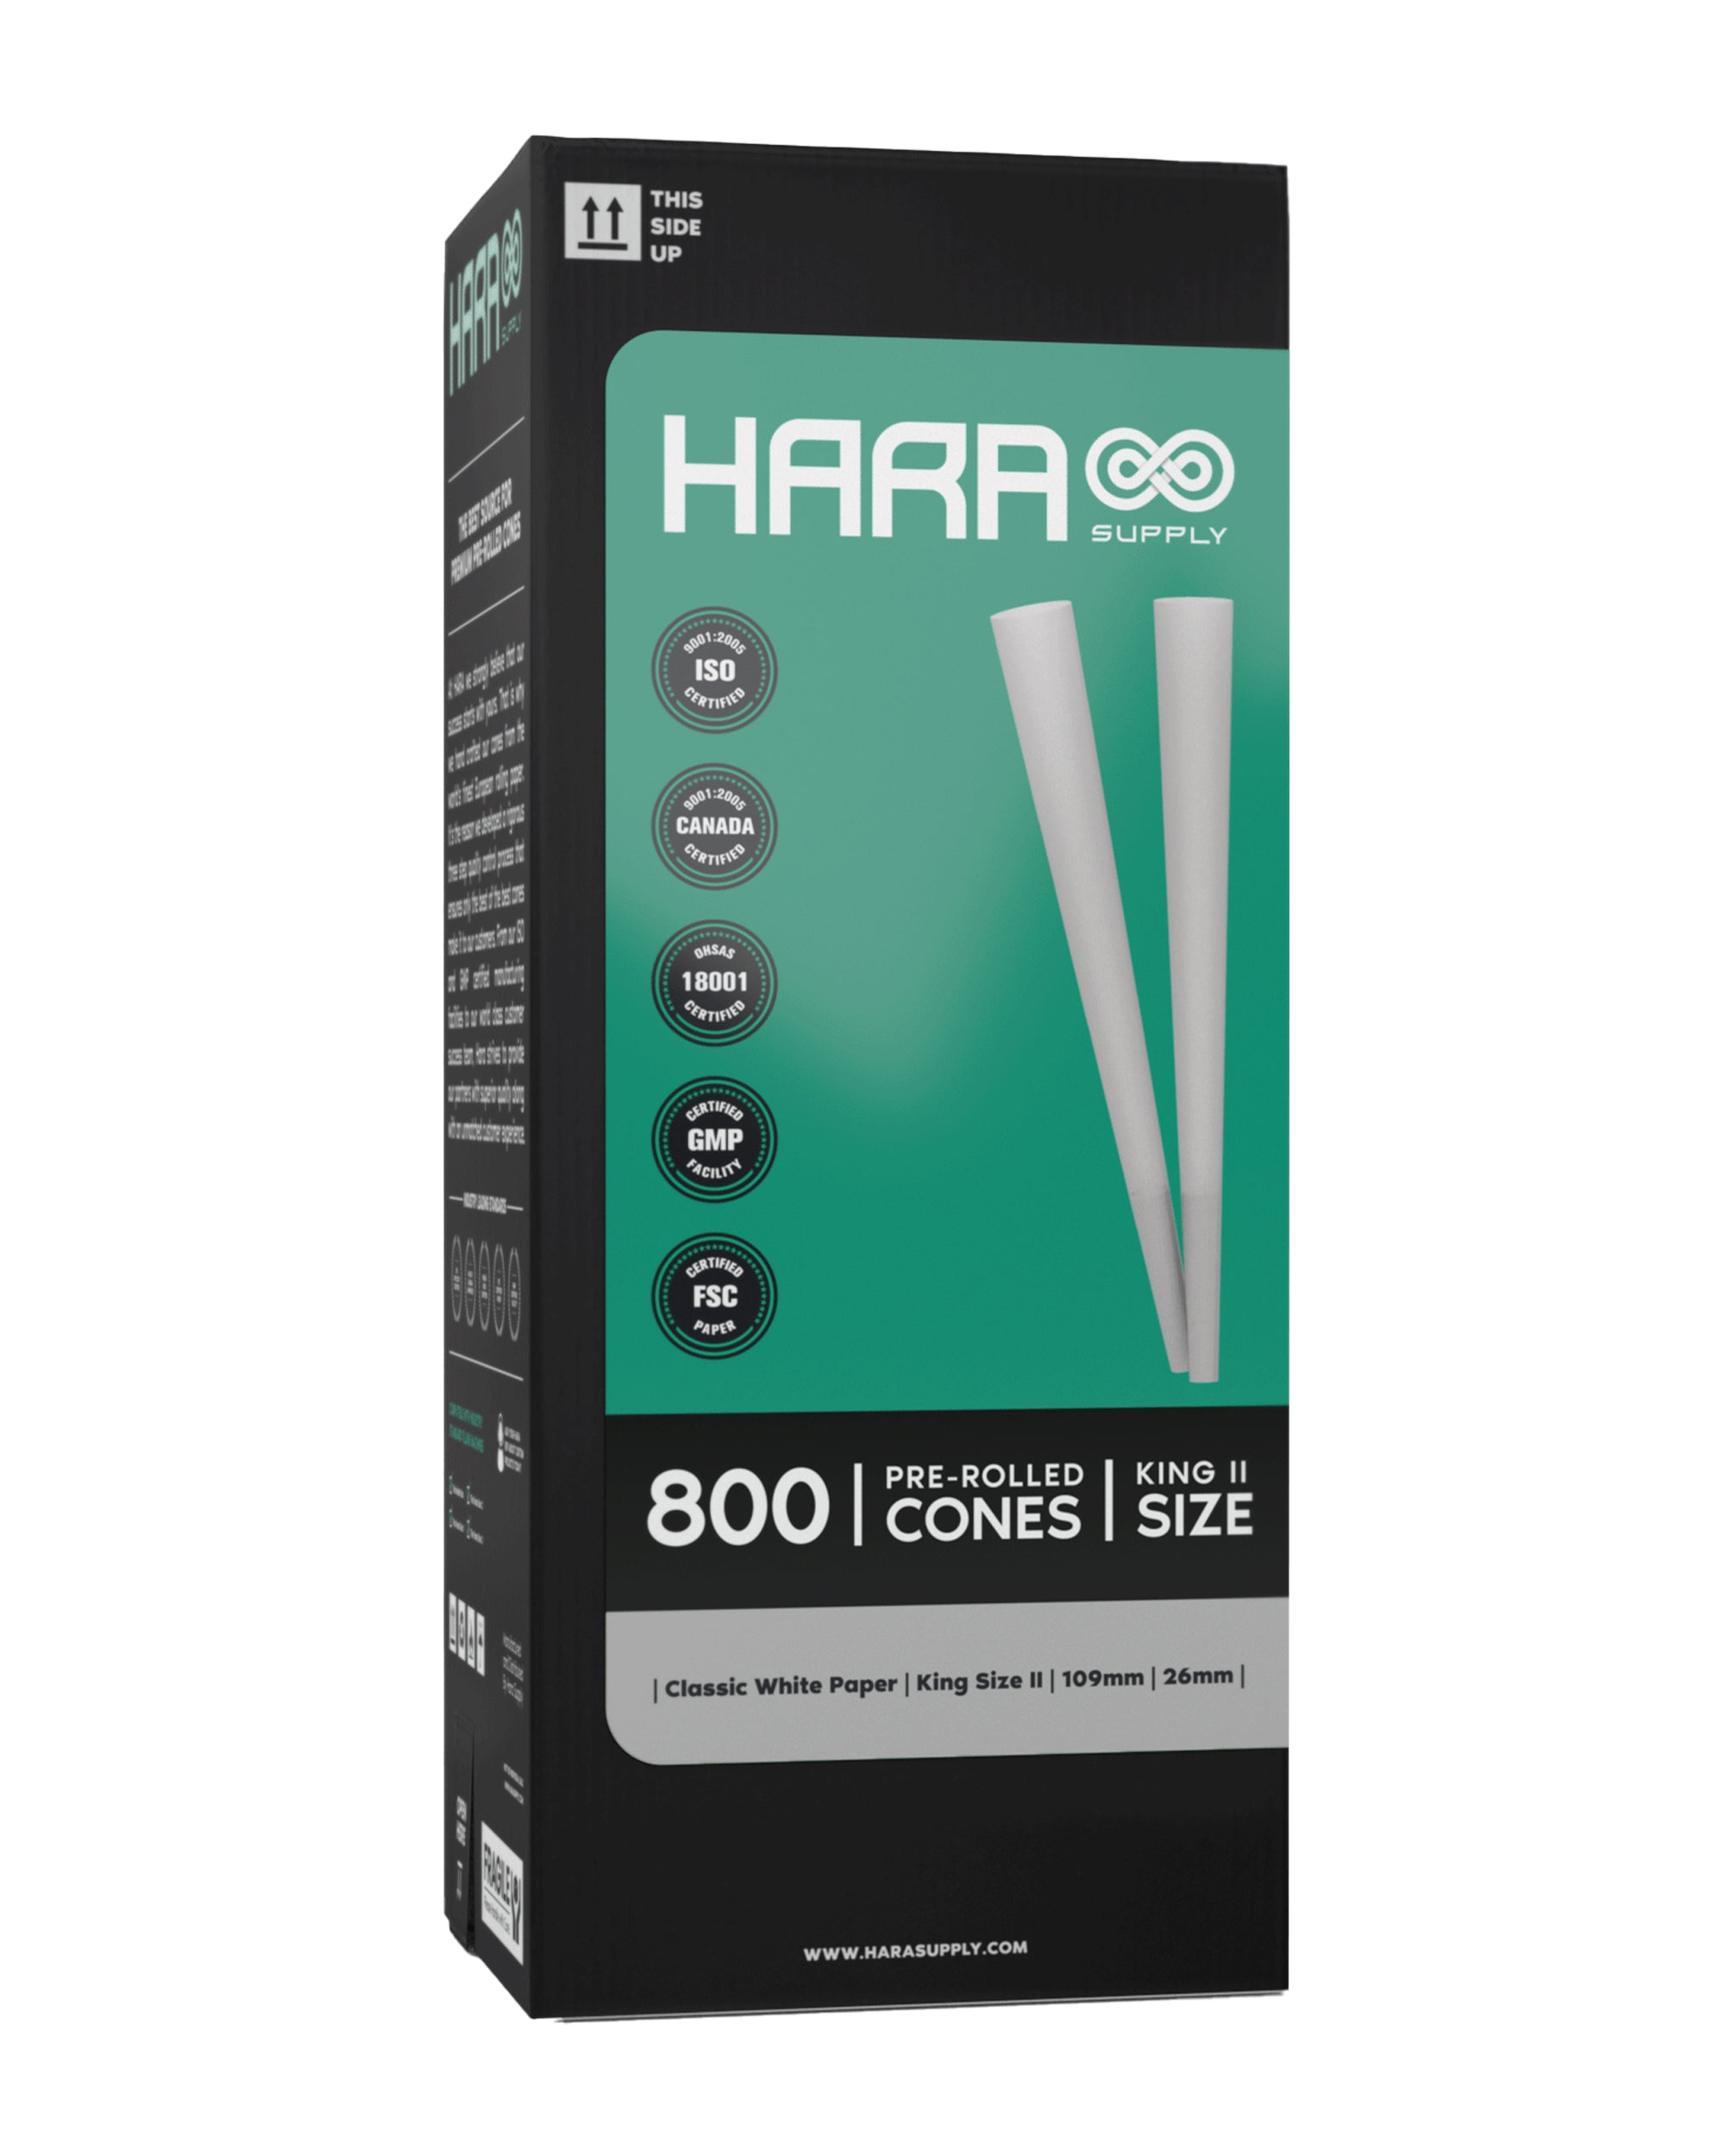 Hara Supply | King Size Pre-Rolled Cones w/ Filter Tip | 109mm - Bleached Paper - 800 Count